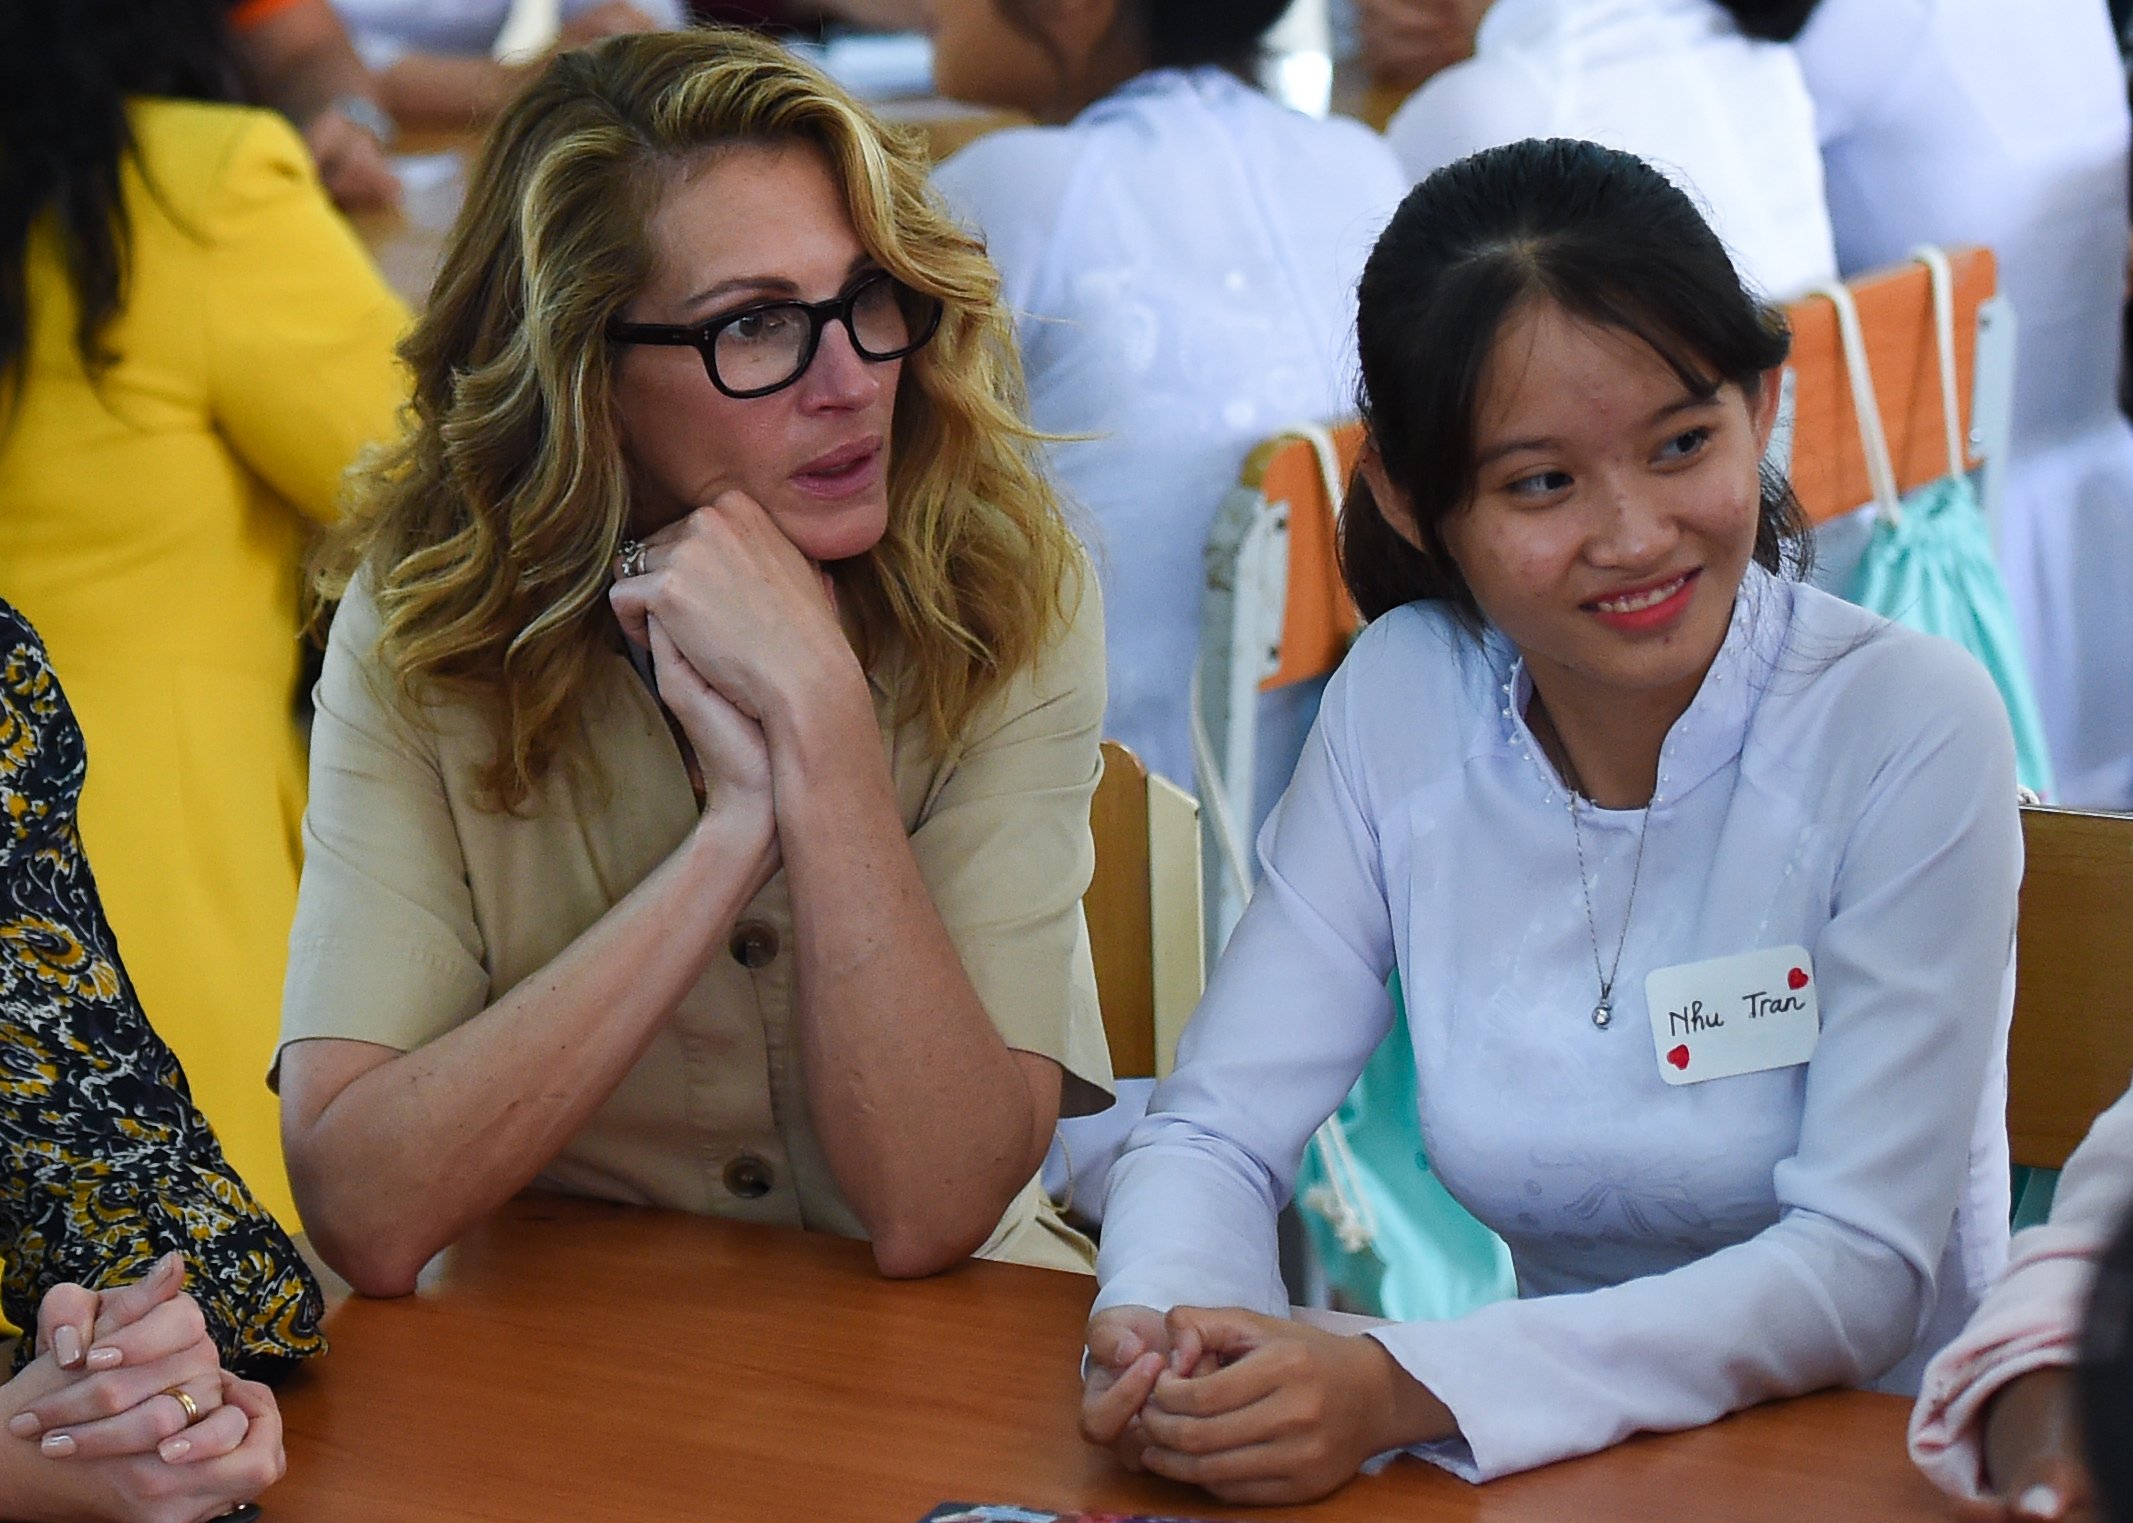 Actress Julia Roberts pictured listening to Vietnamese students in Can Giuoc district, Long An province on December 9, 2019 in Vietnam ┃Source: Getty Images